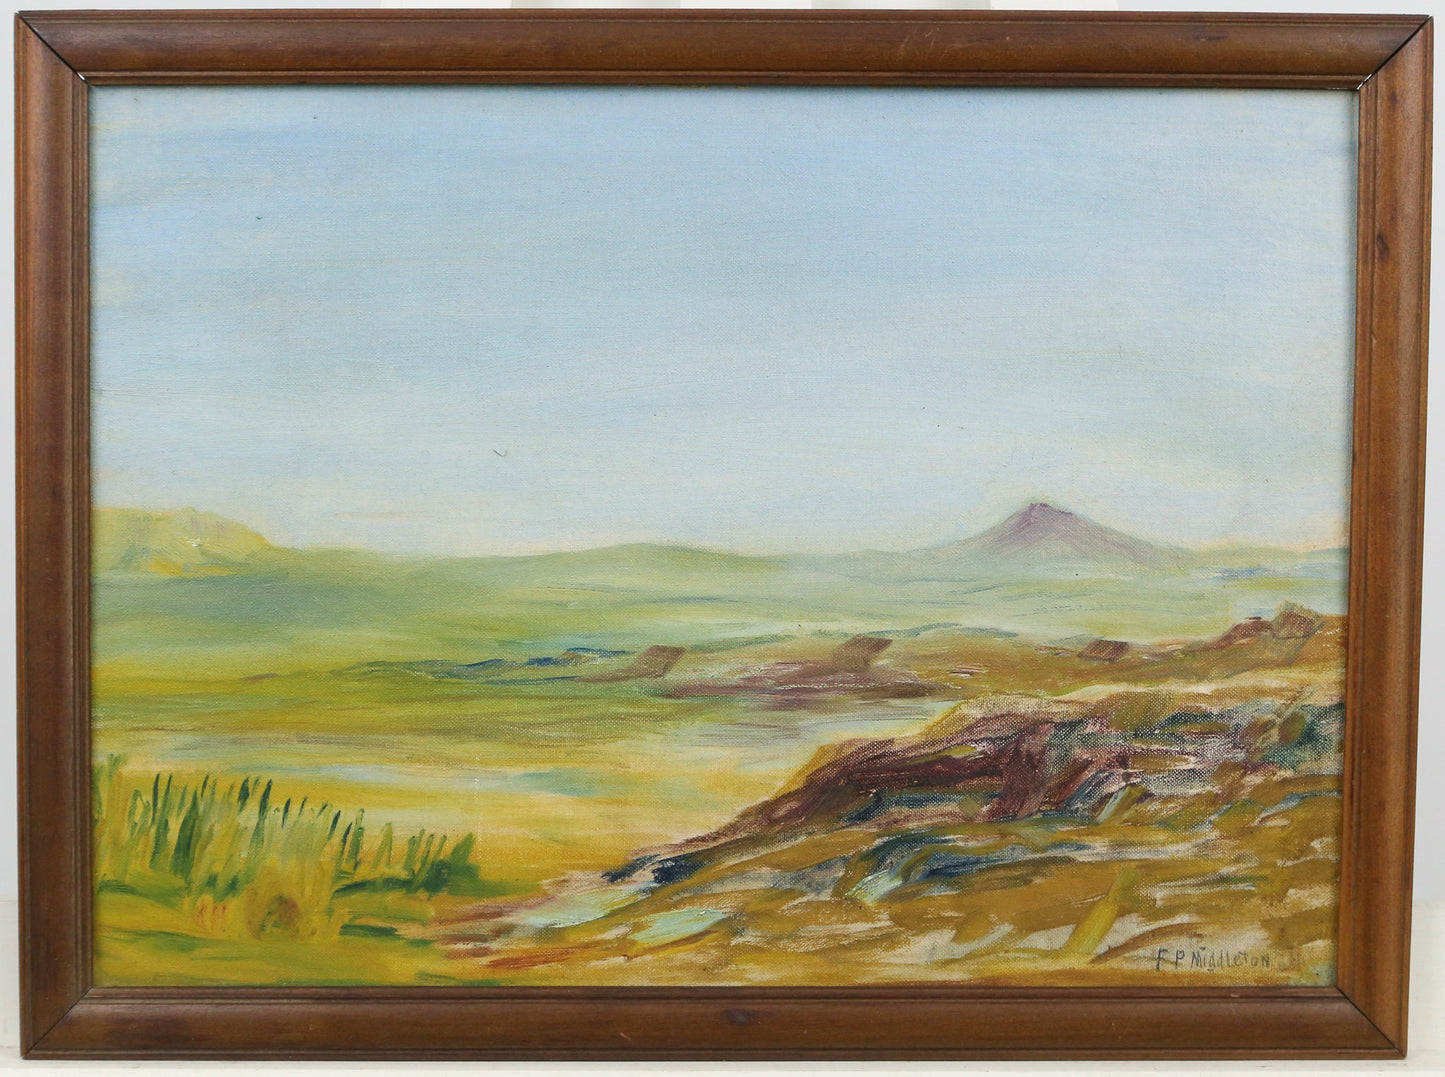 Painting Landscape Southwest New Mexico Oil Signed F. Perry Middleton "High Mesa" Providence Art Club 1920s